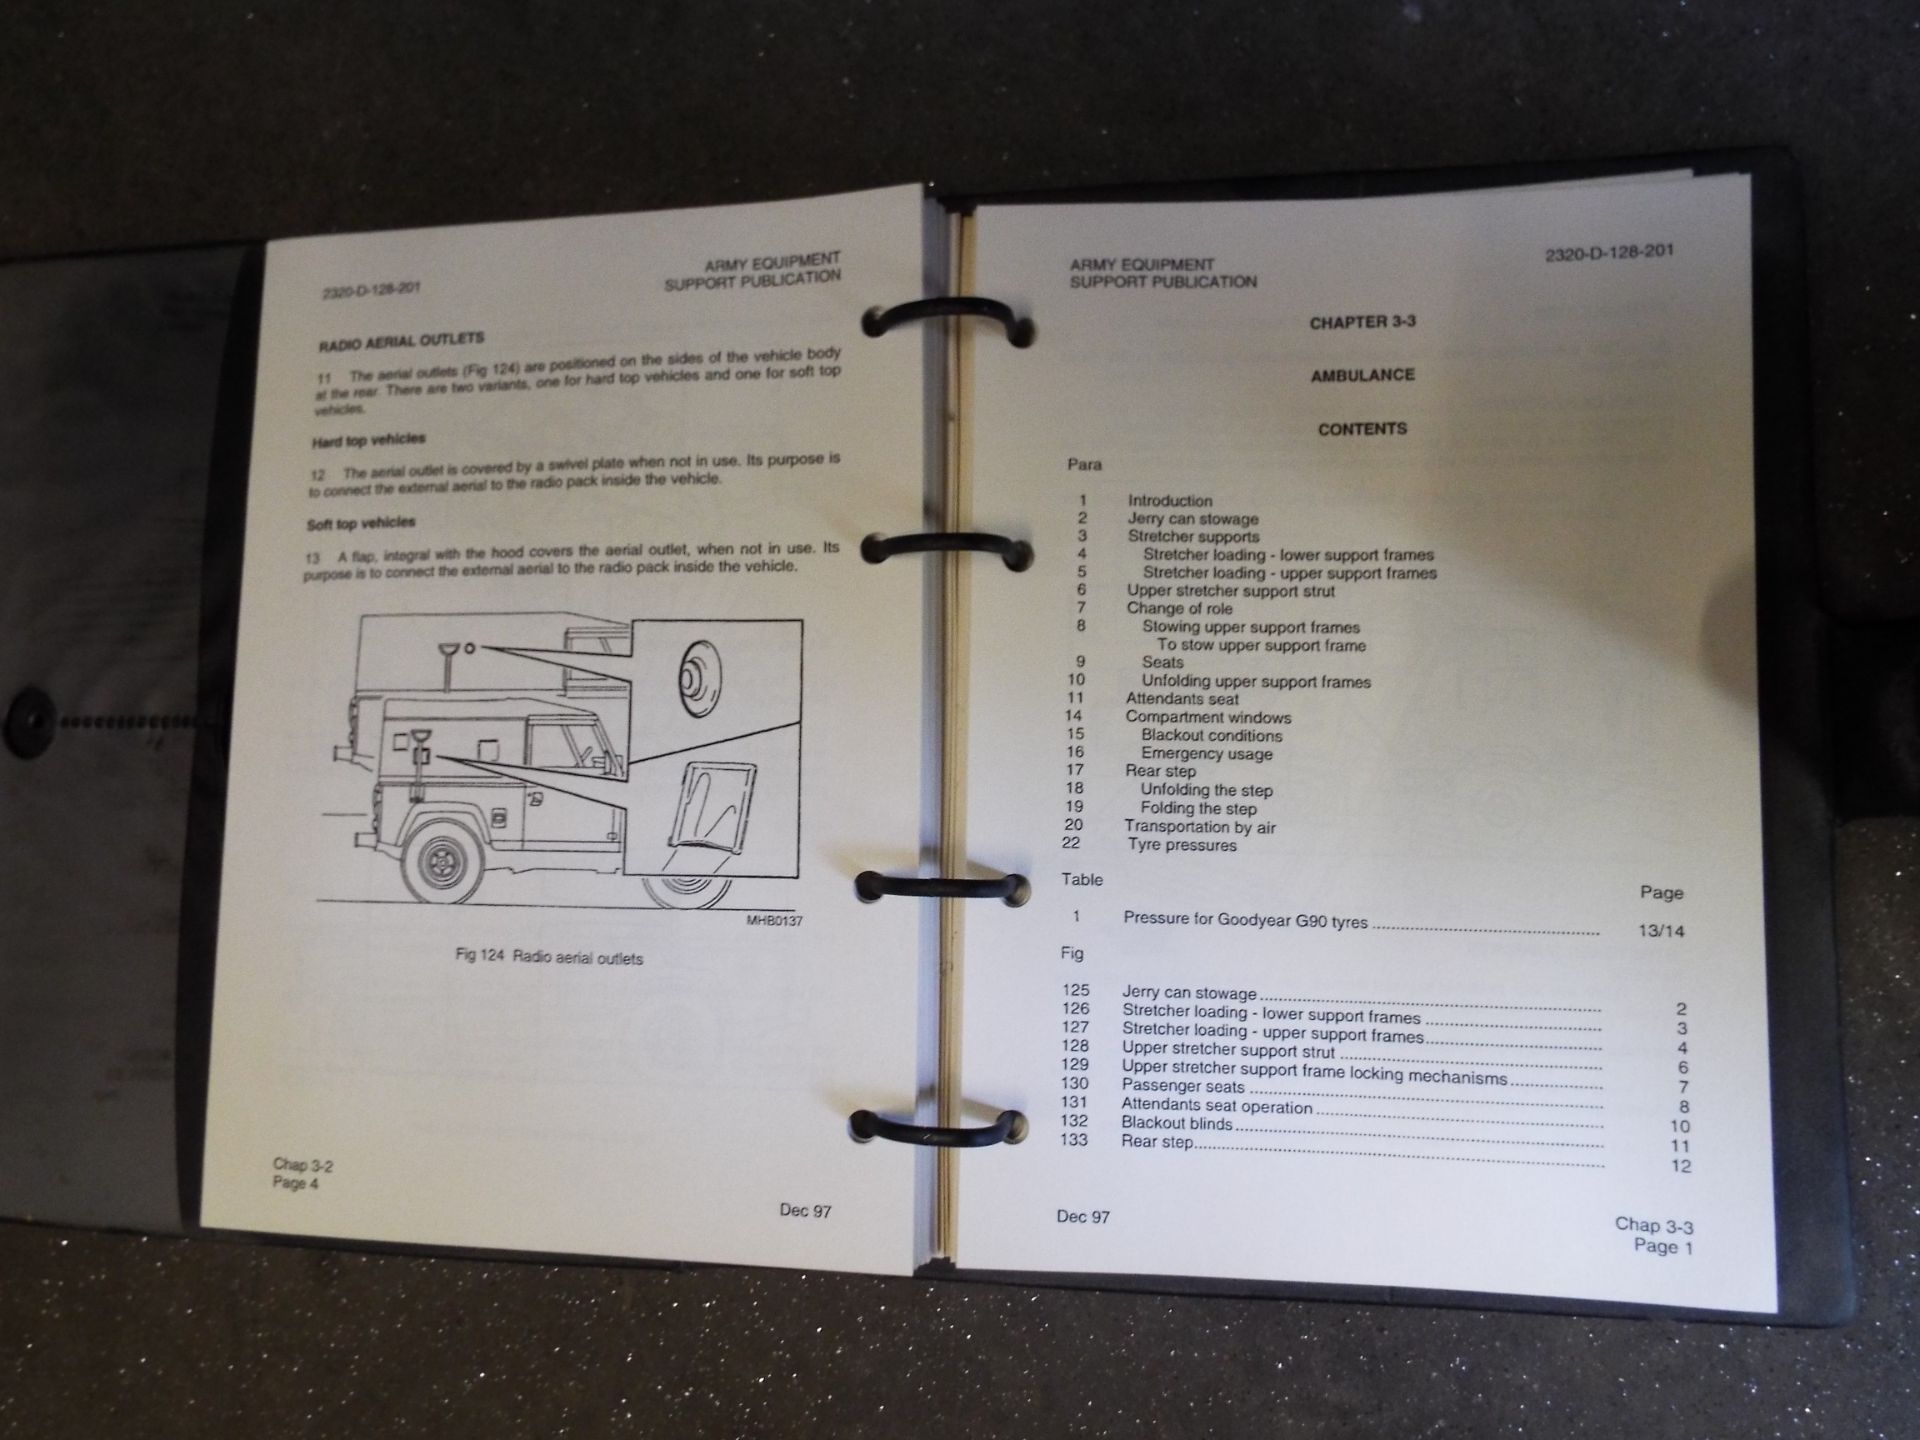 Extremely Rare Military Land Rover WOLF Operating Manual - Image 8 of 10